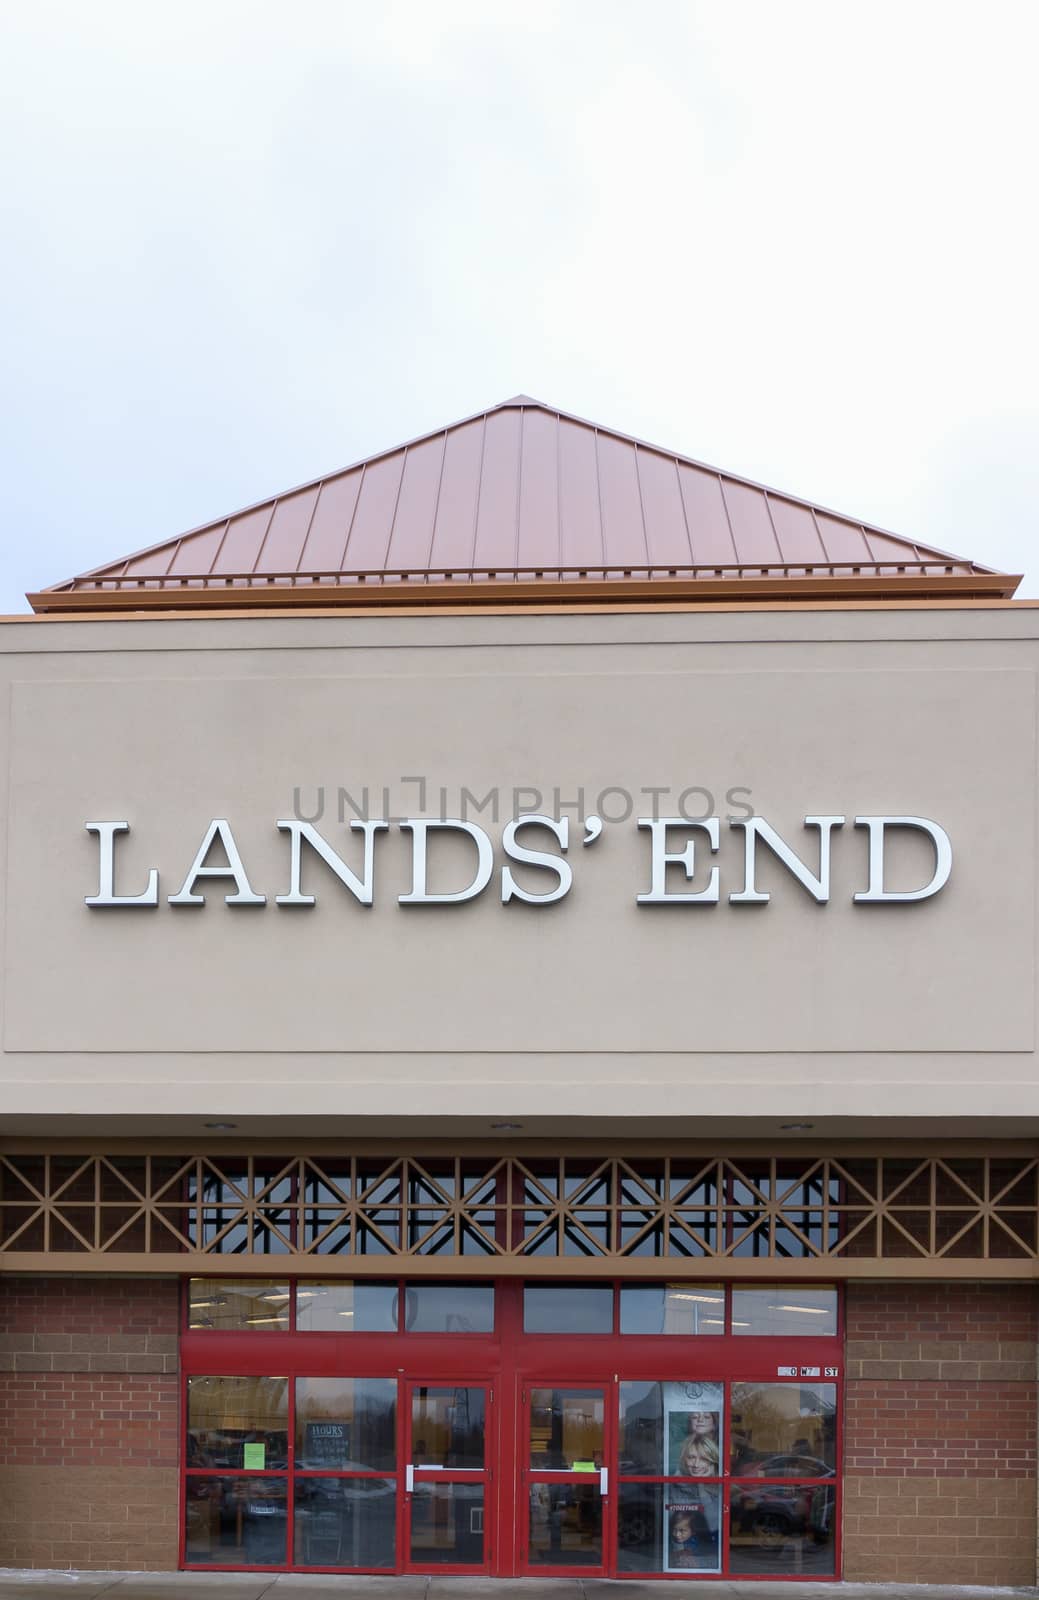 Land's End Retail Store Exterior by wolterk